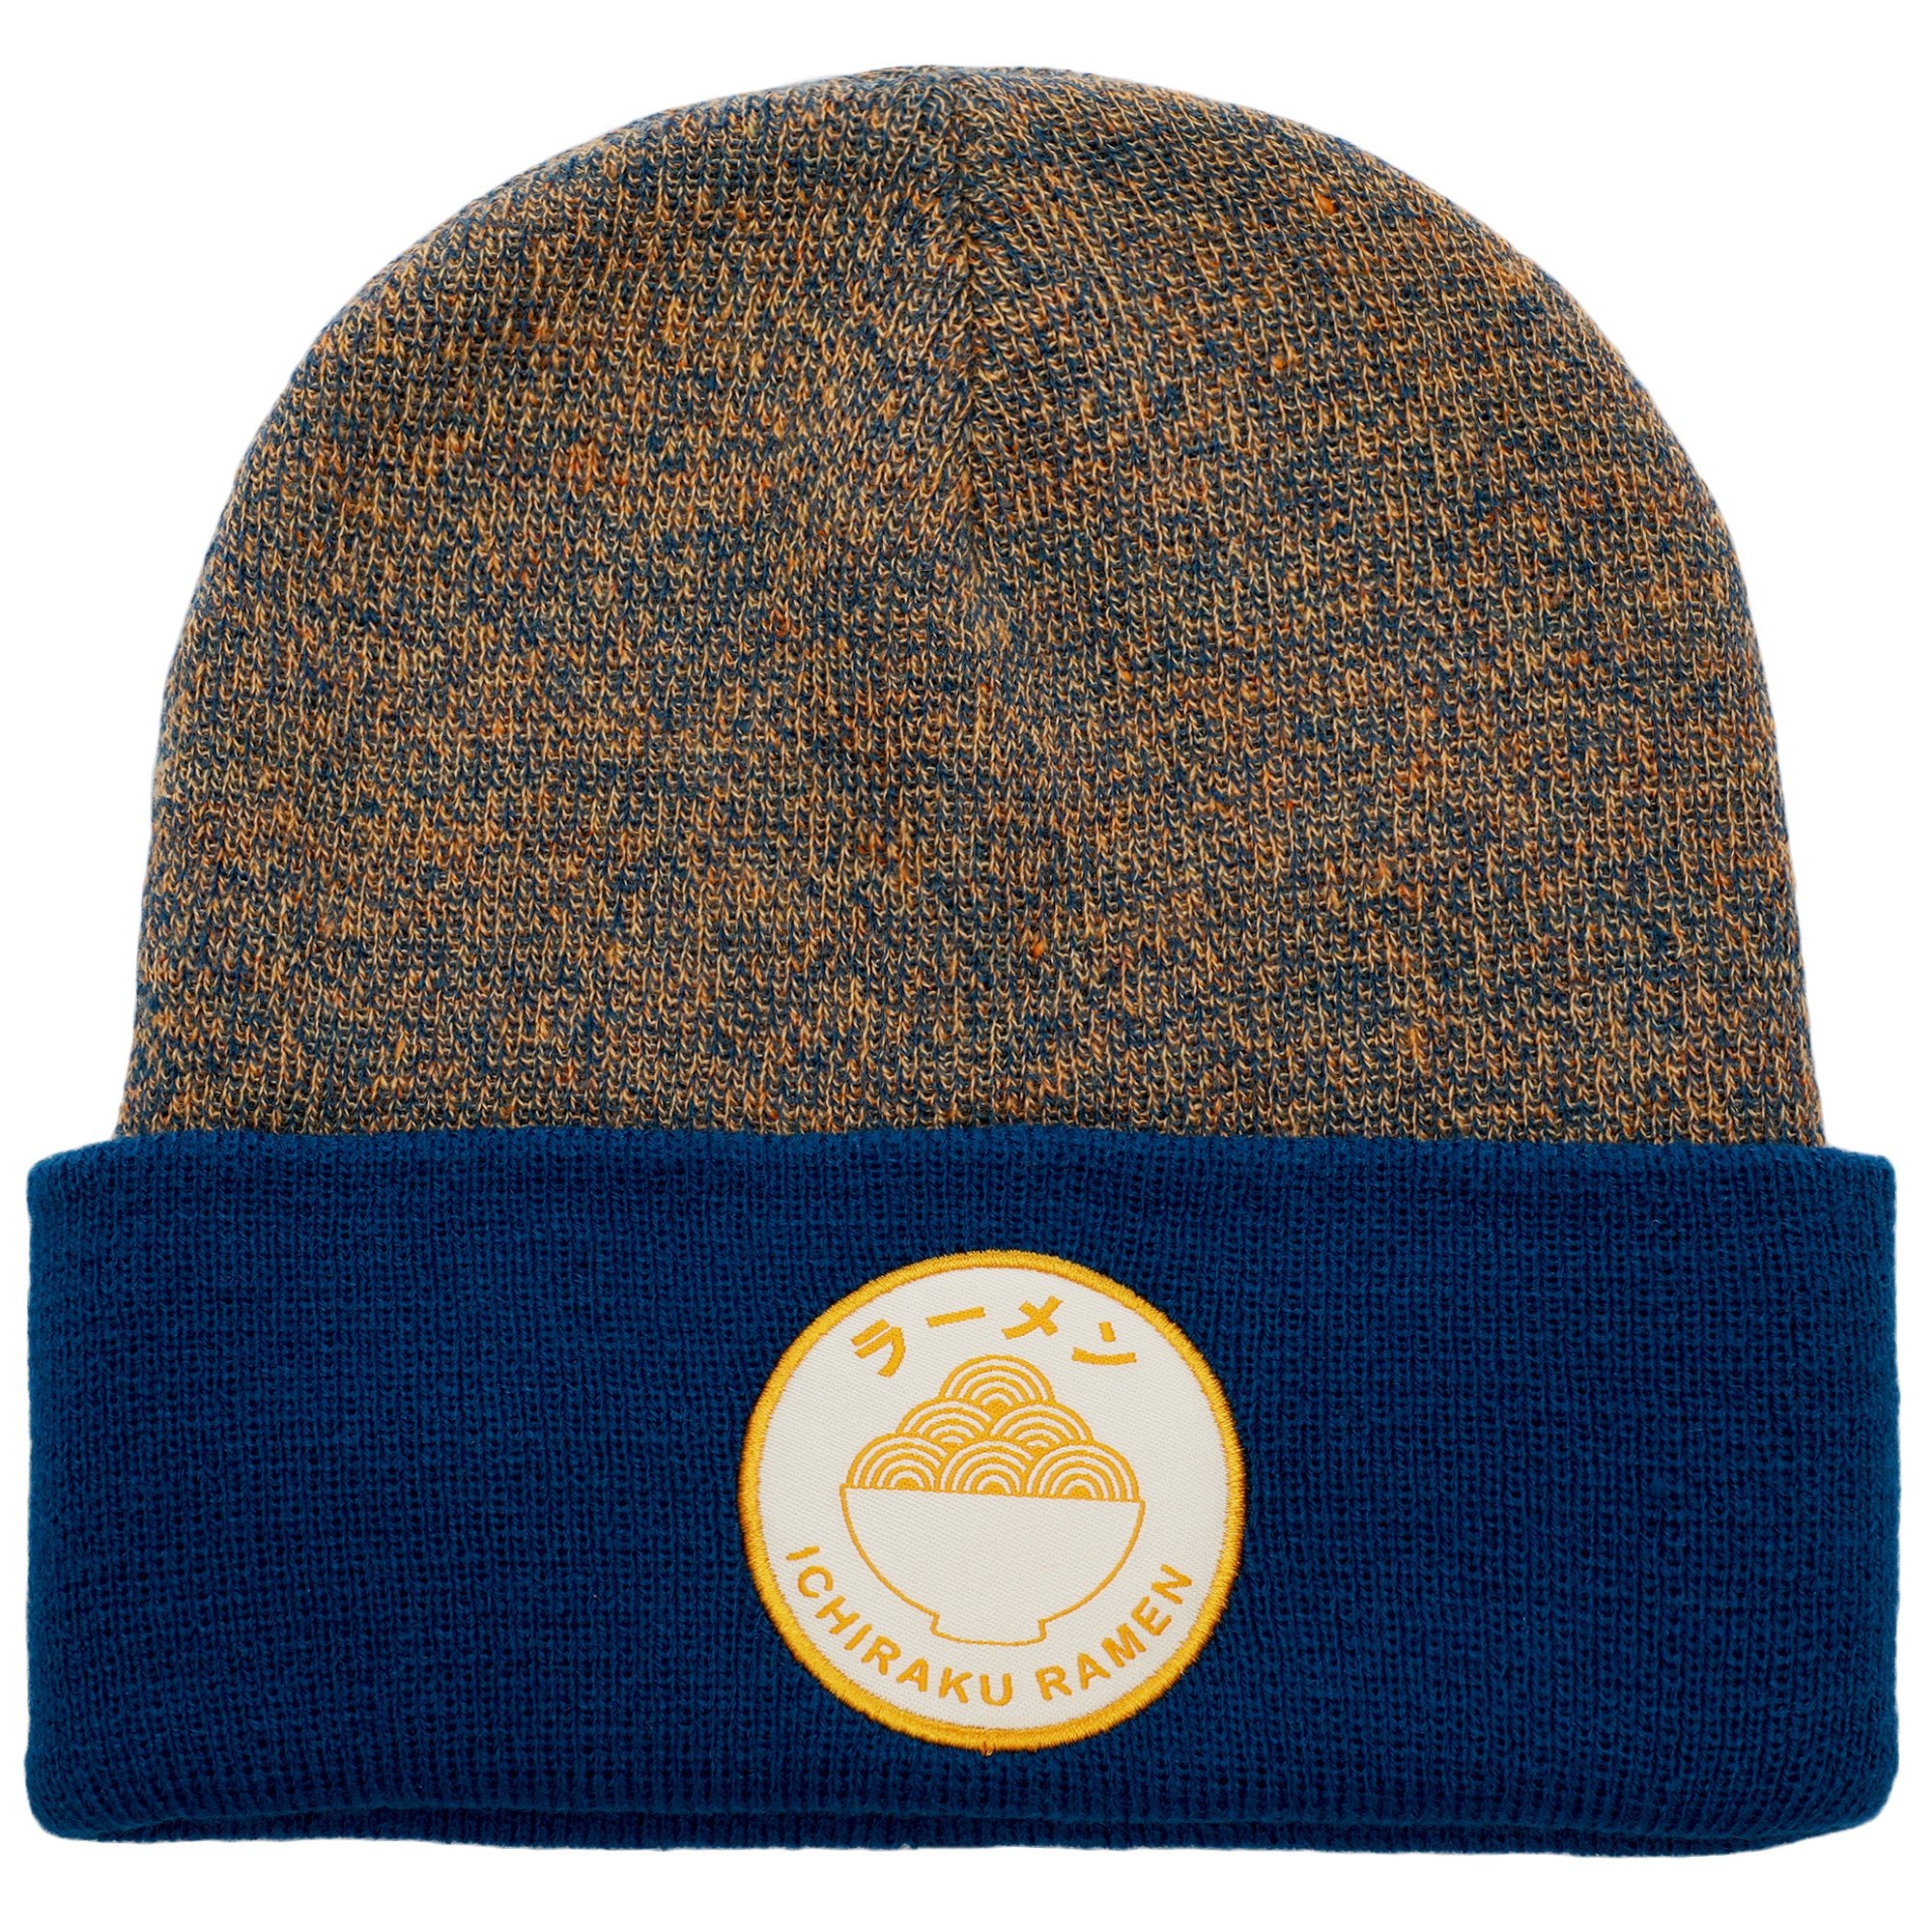 Naruto - Ramen Patch Beanie image count 0